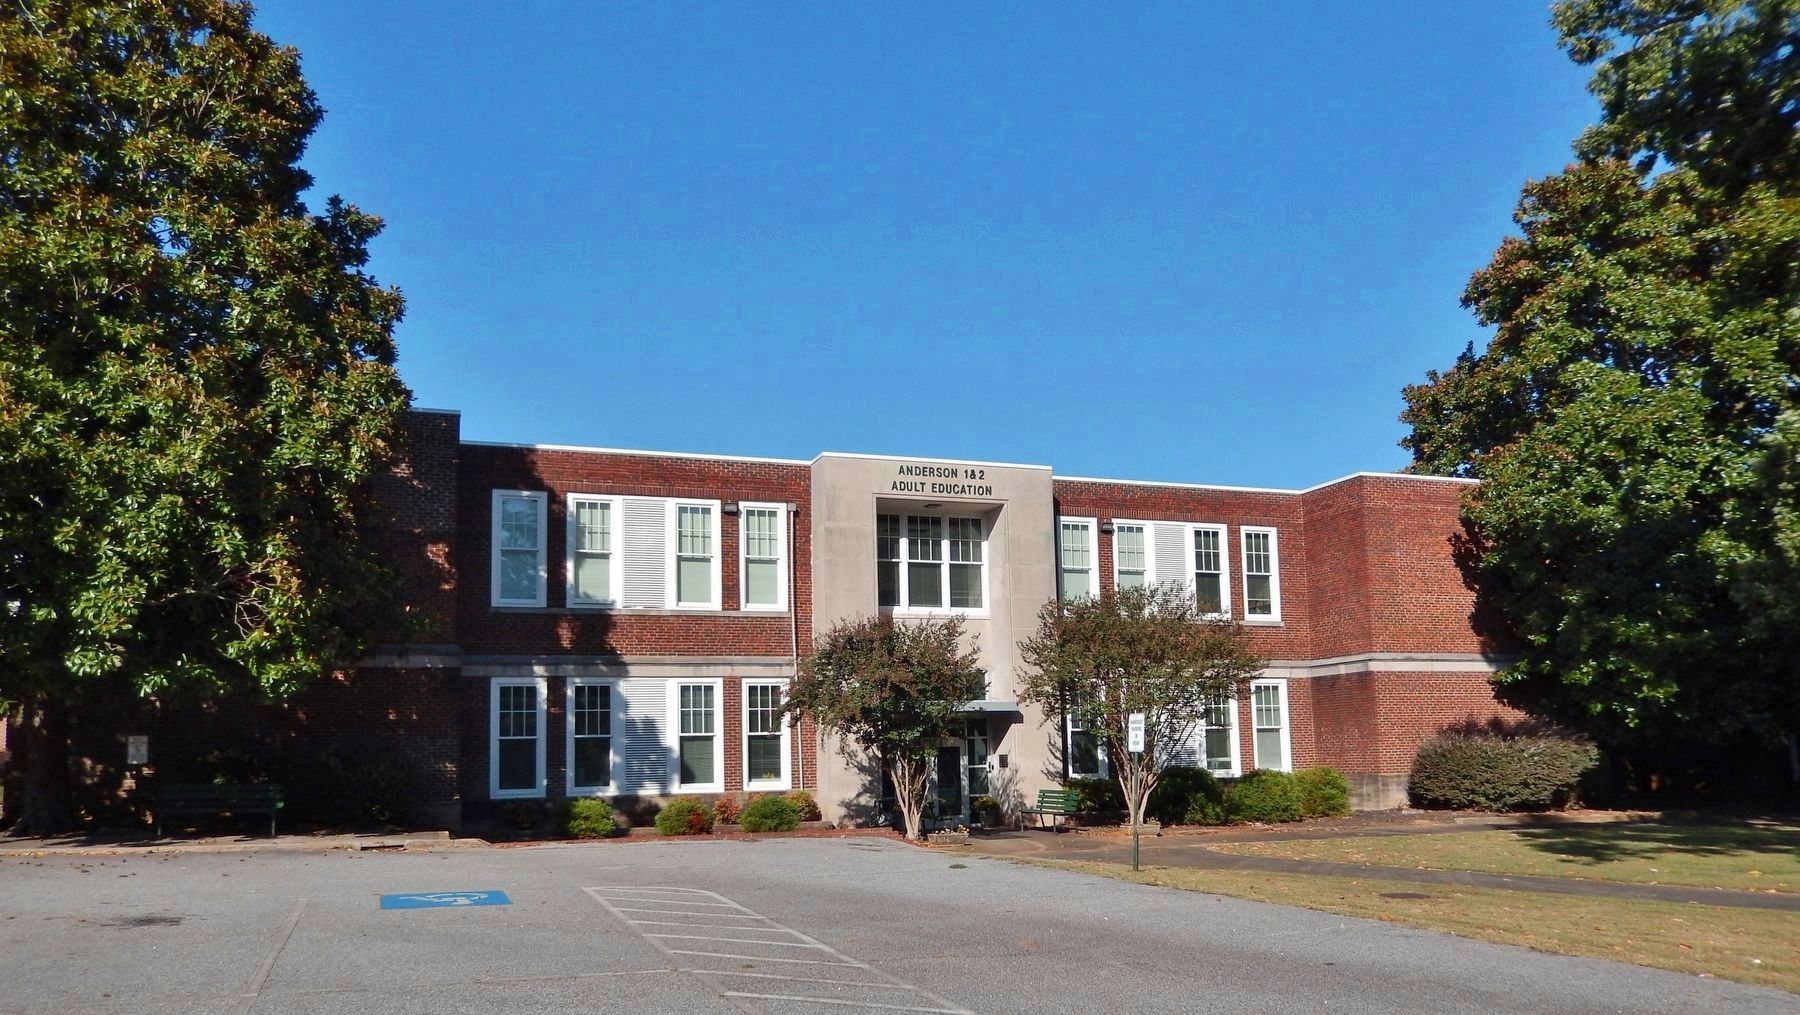 Anderson 1 & 2 Adult Education Building (<i>formerly Pelzer Elementary School</i>) image. Click for full size.